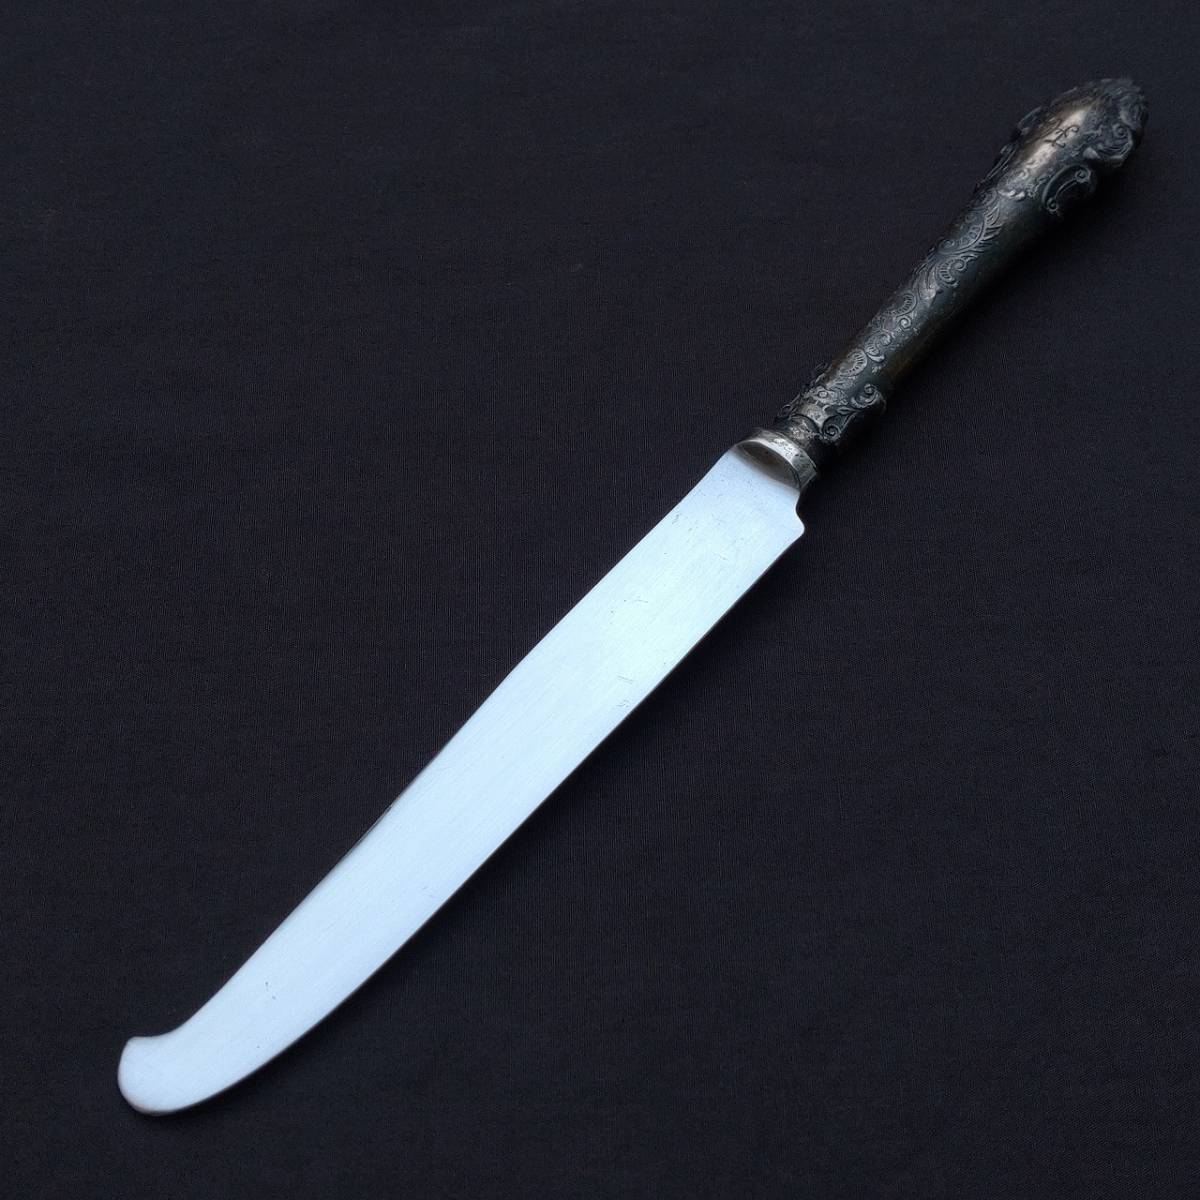  table knife steak knife cutlery J.K.STAINLESS blade length approximately 140. total length approximately 265. engraving pattern European style [4603]